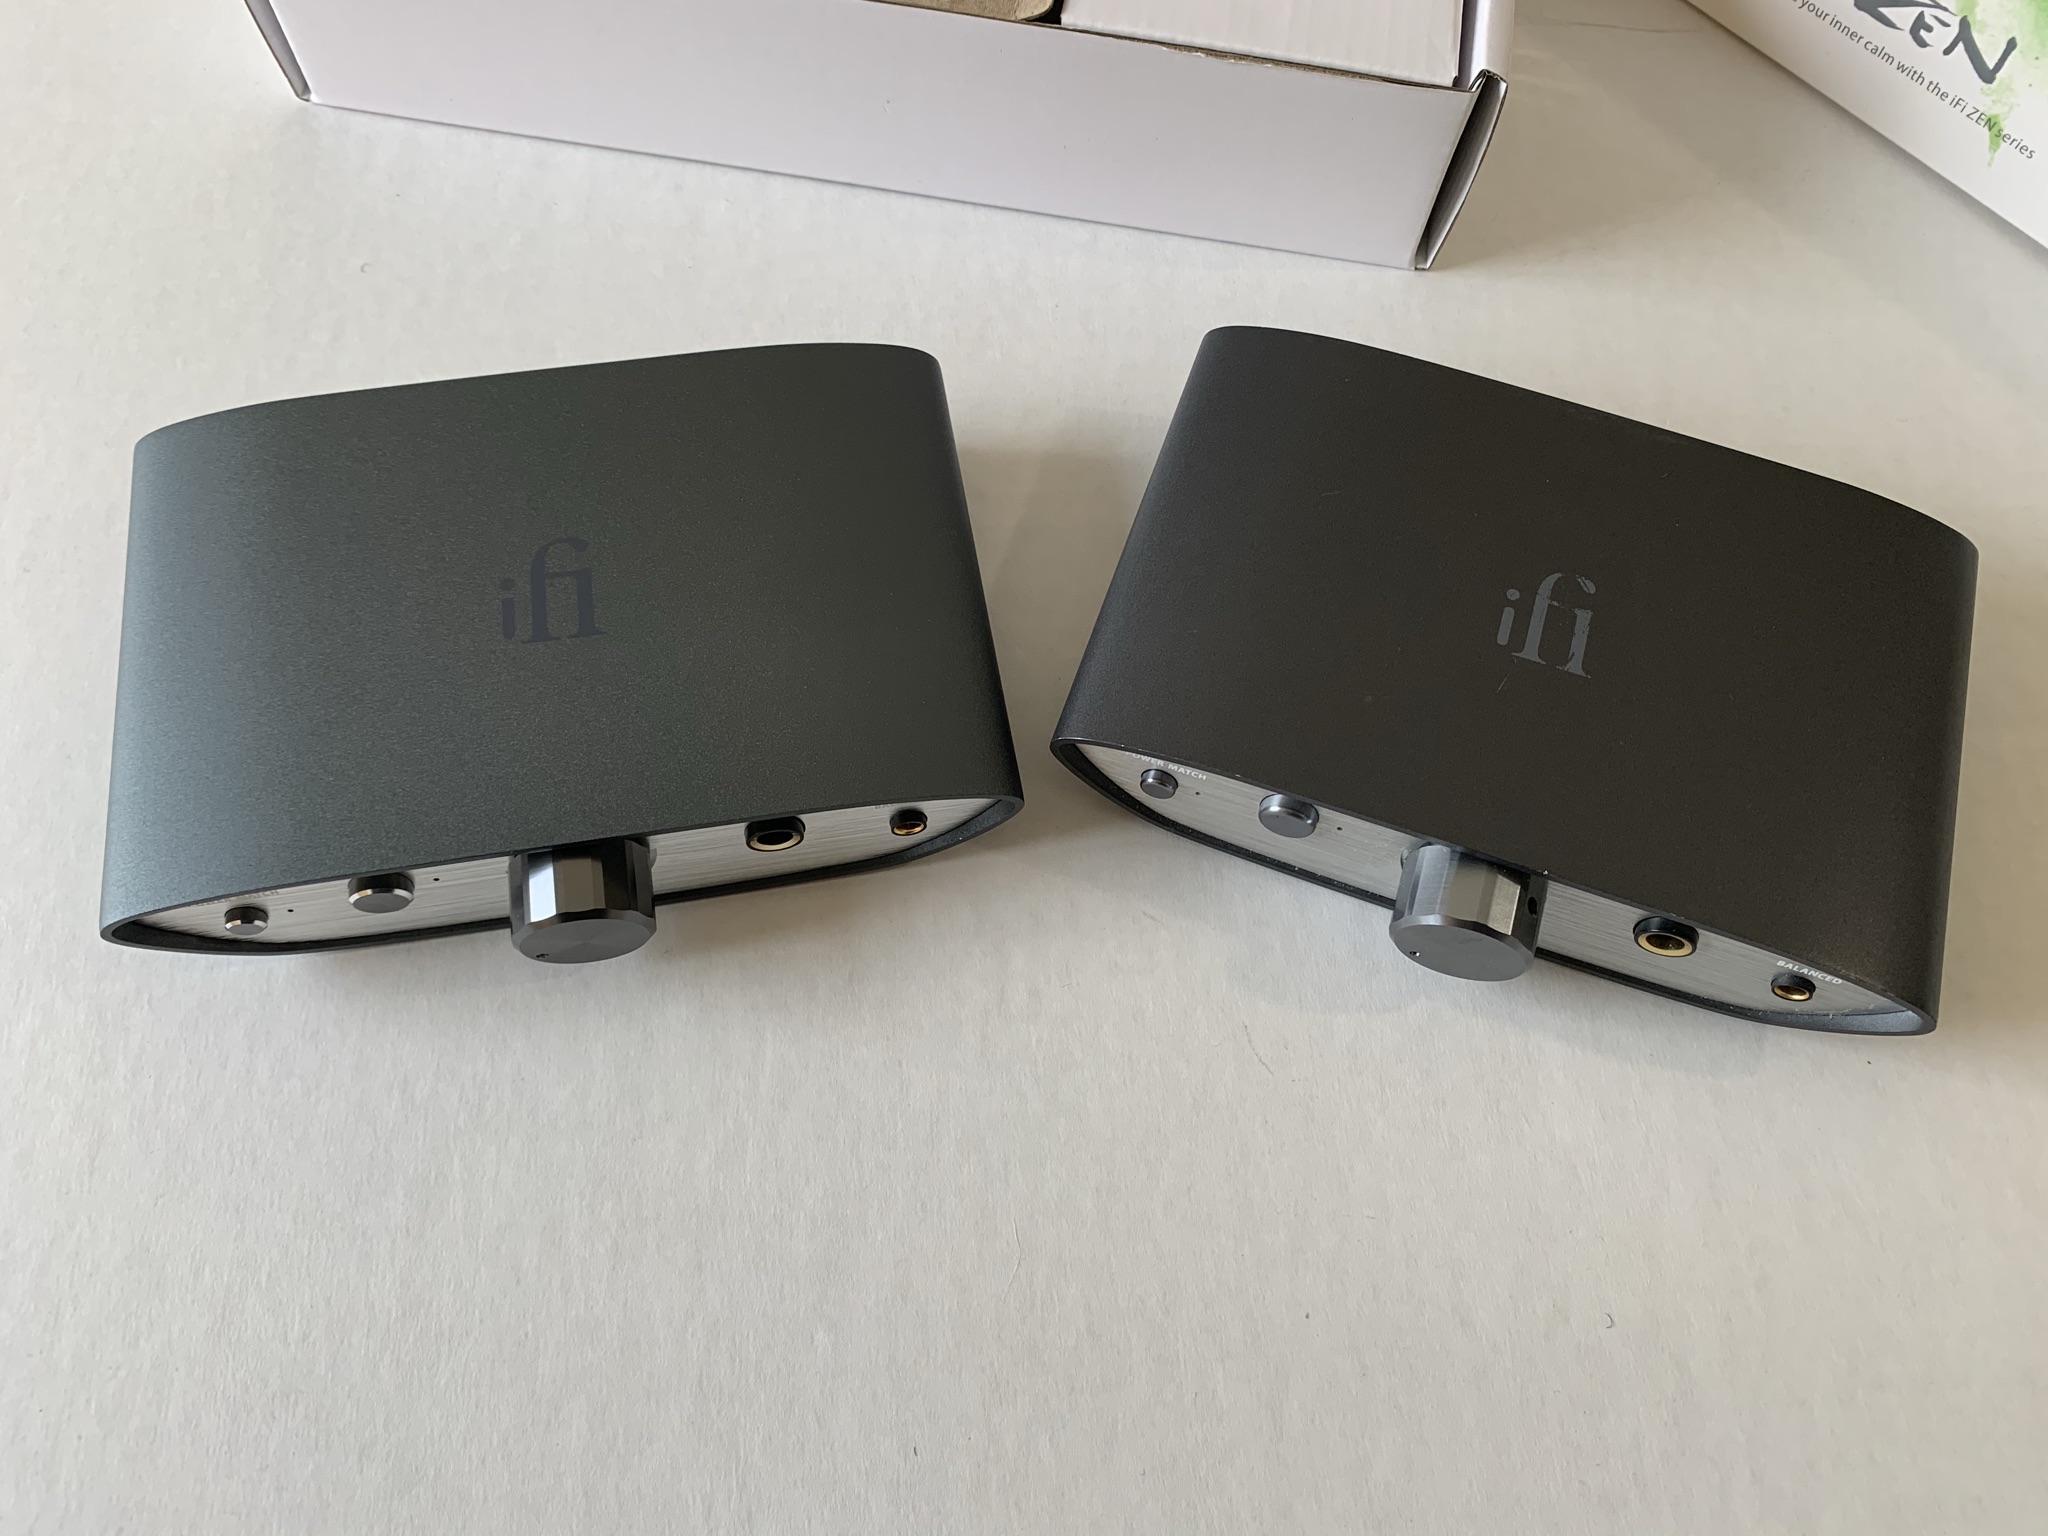 IFi Audio Zen DAC V2 Review: A Remarkable Dac Amp Combo Gets Even